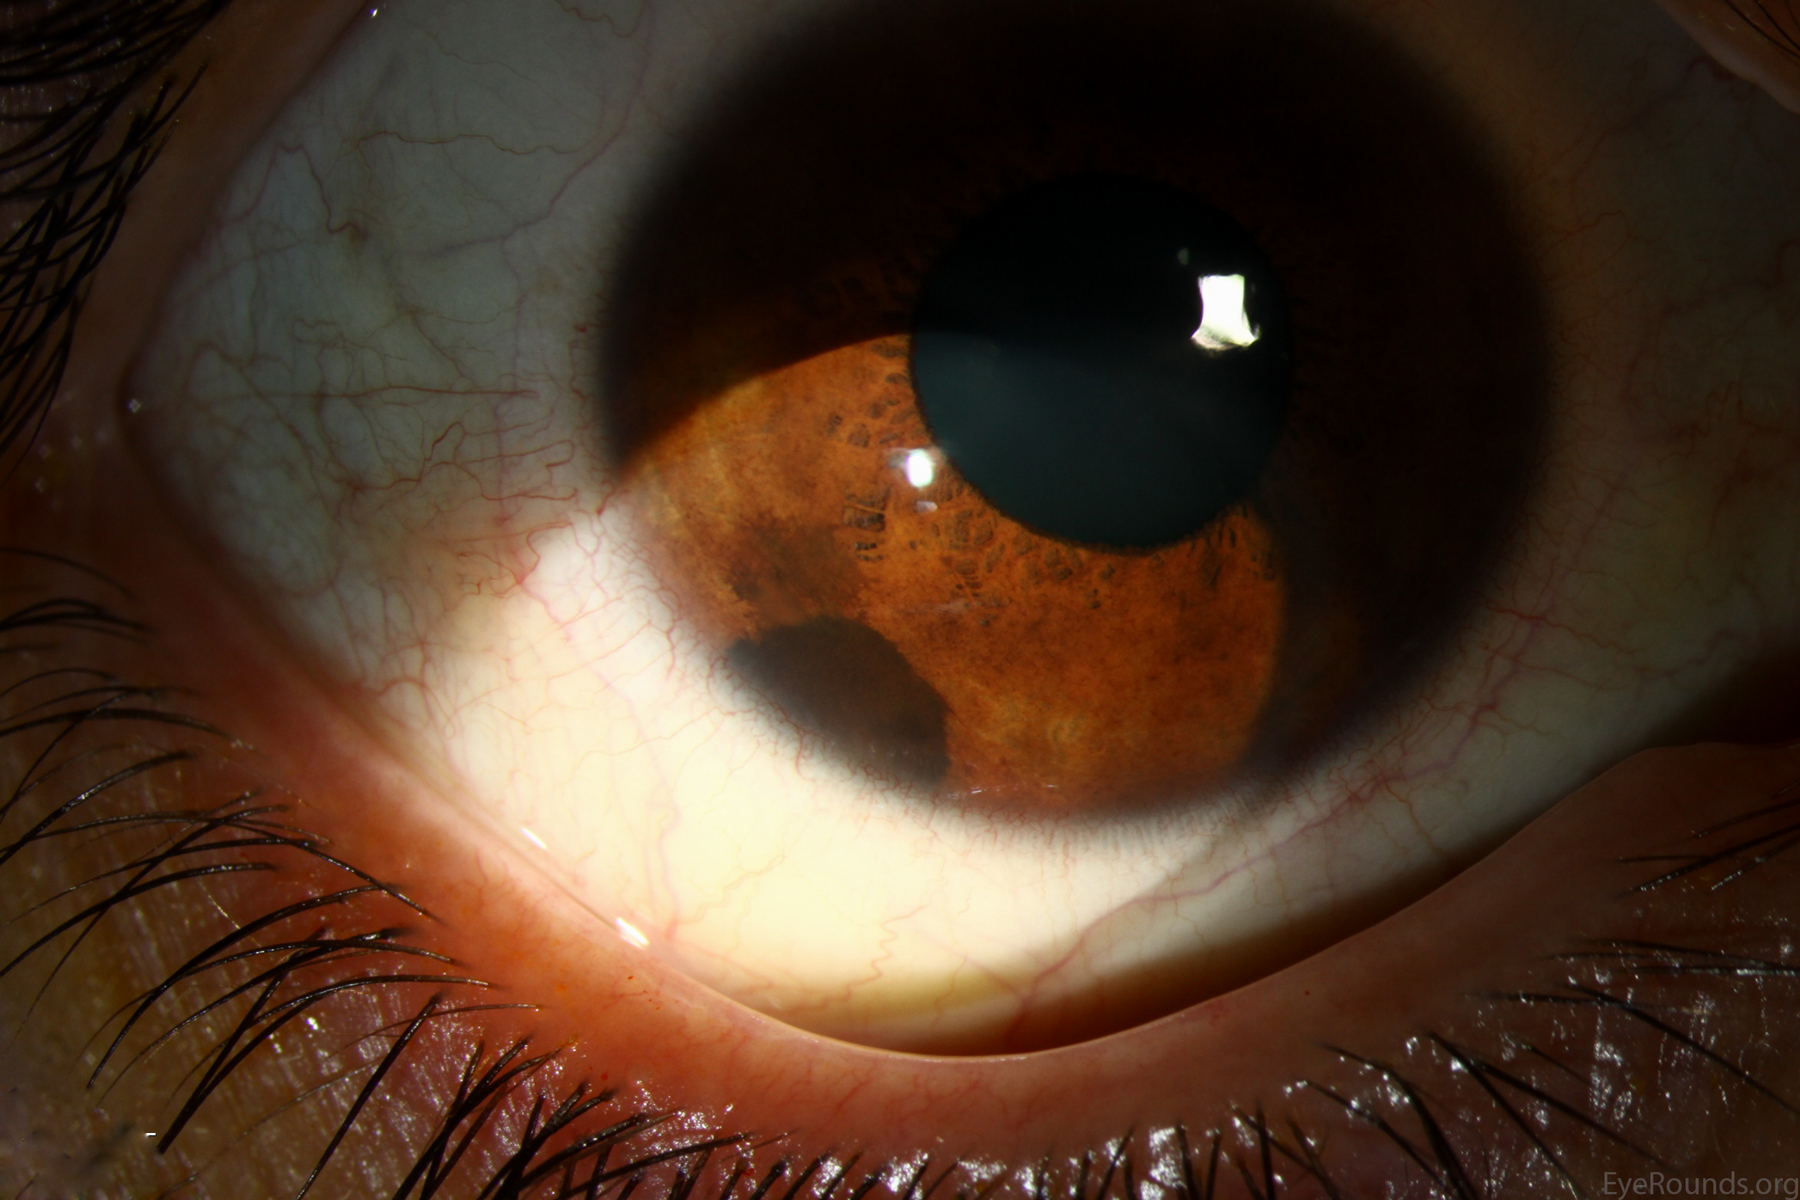 Dilated funduscopic examination showed severe, diffuse optic atrophy OD and bow-tie (band) optic atrophy OS